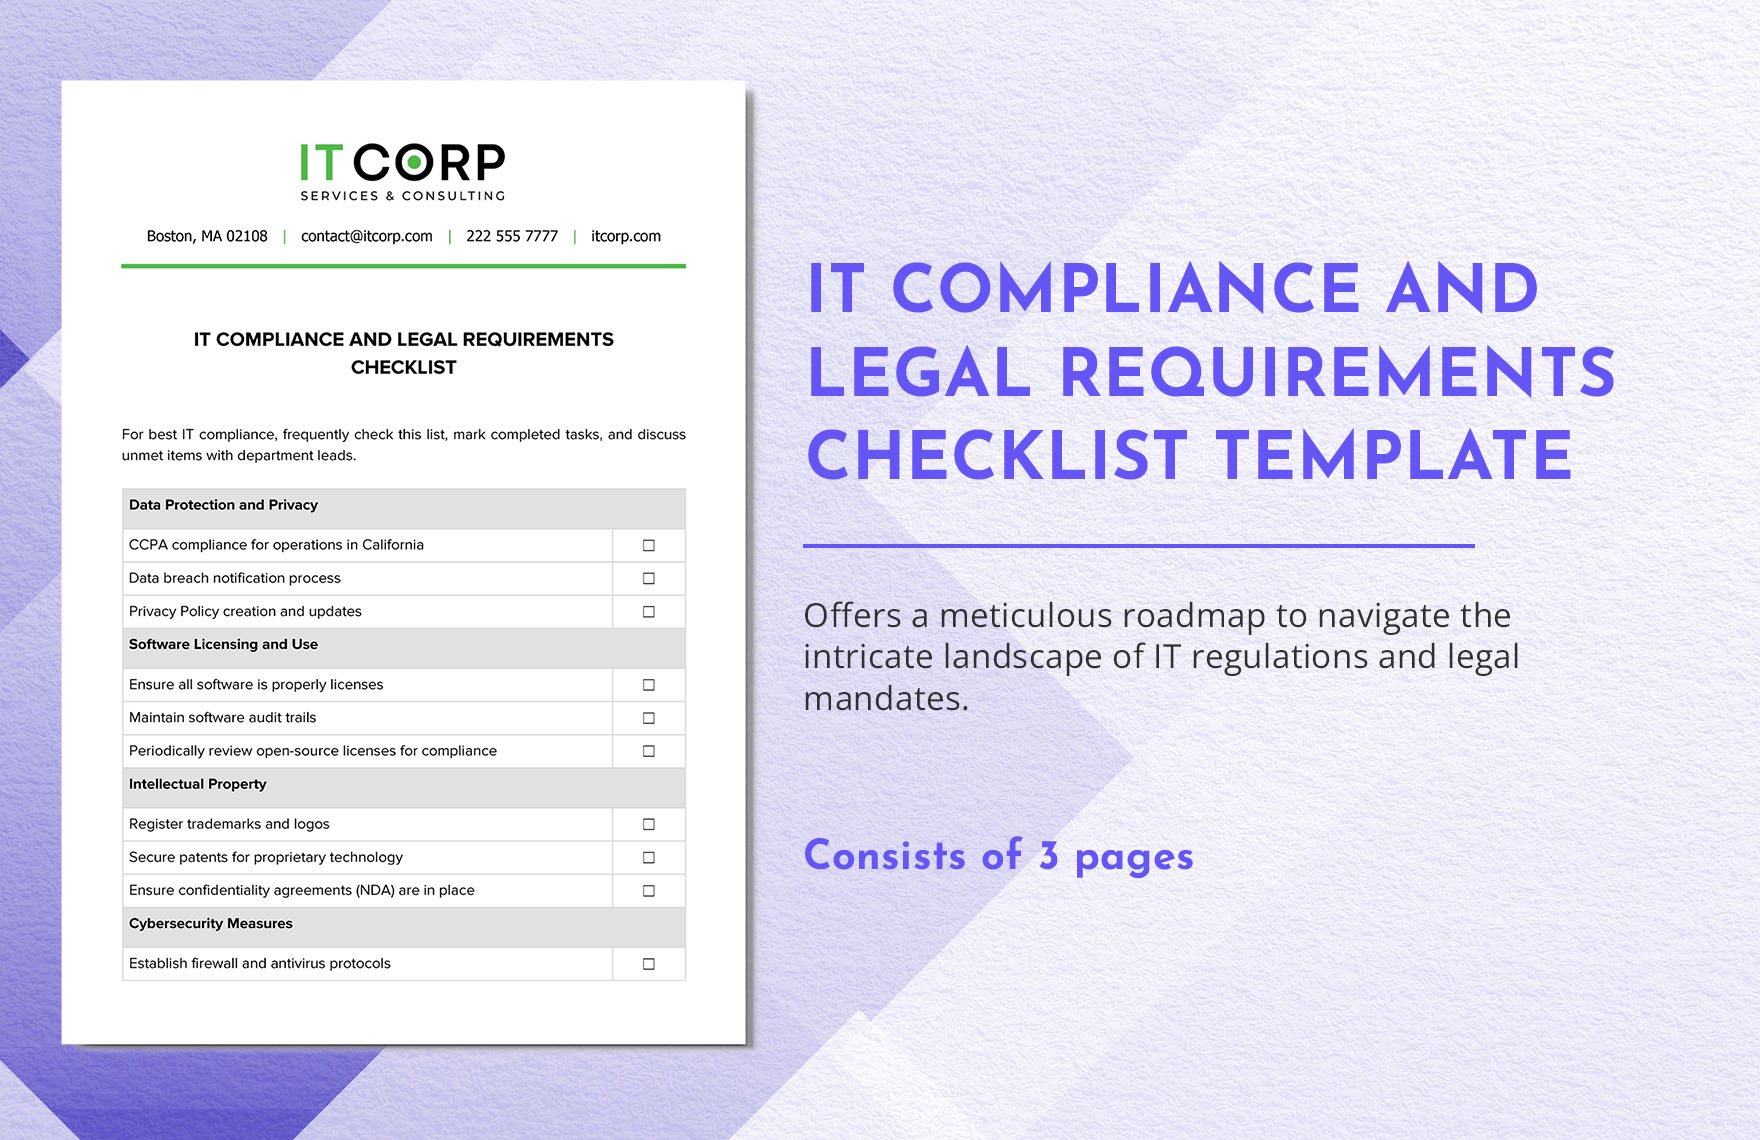 IT Compliance and Legal Requirements Checklist Template in Word, Google Docs, PDF